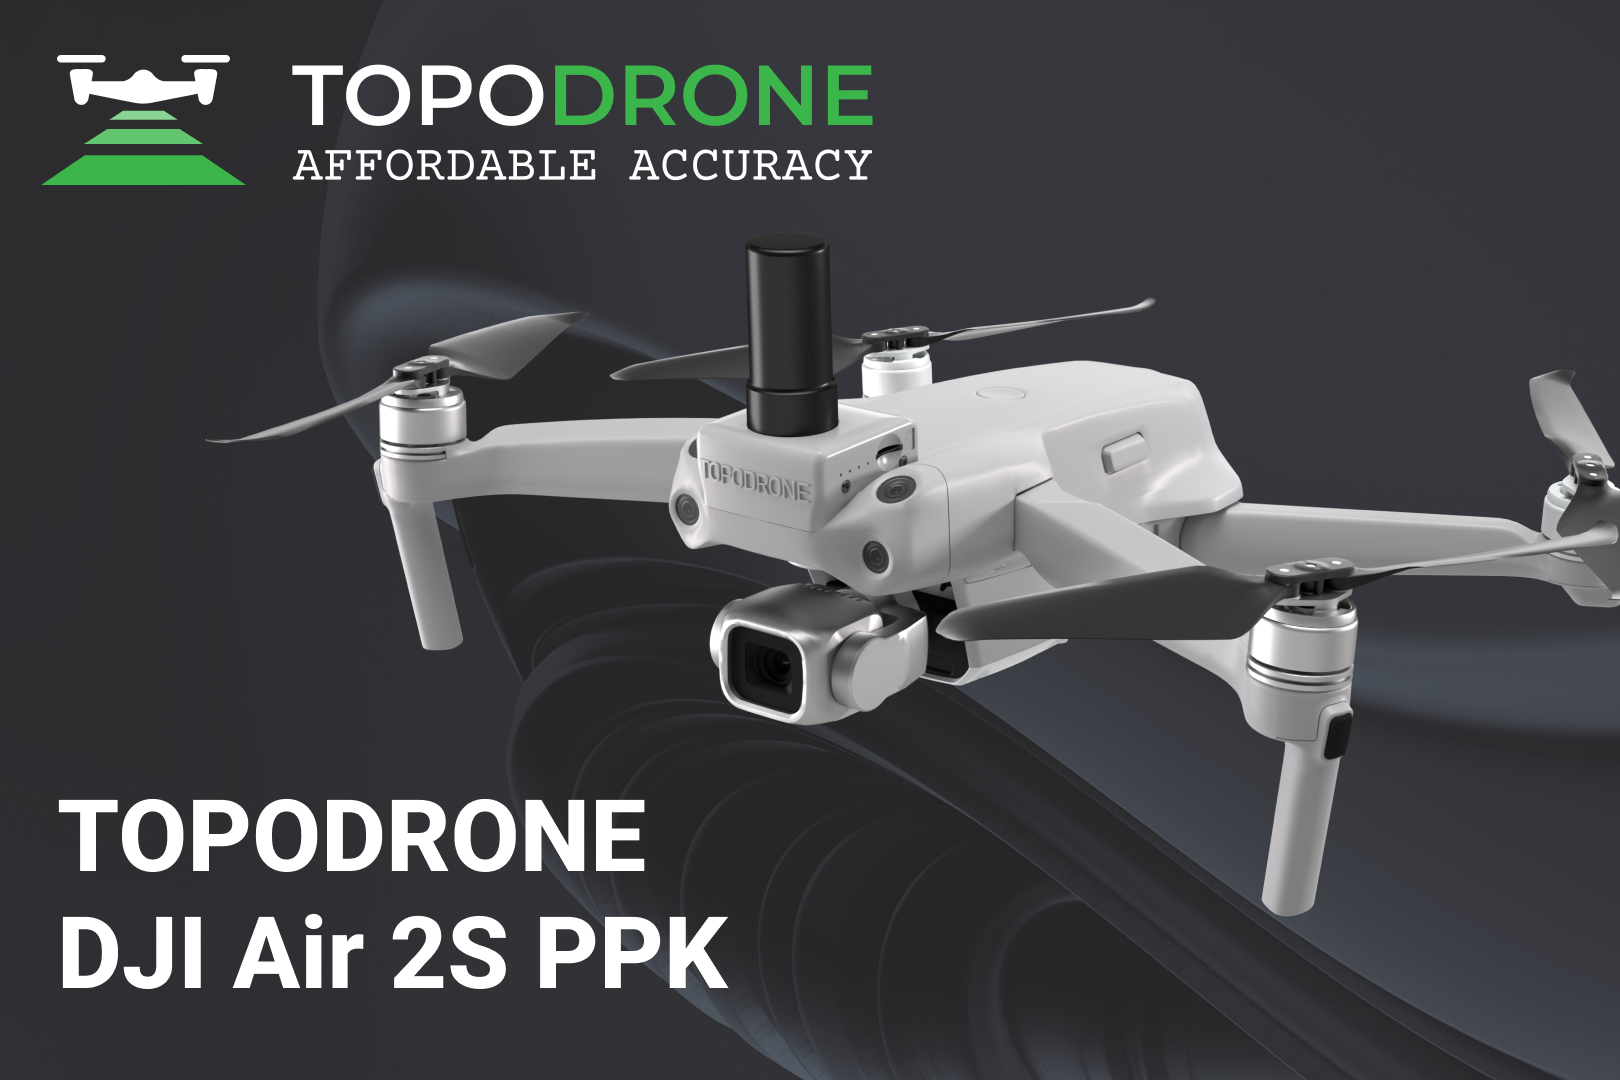 TOPODRONE DJI Air 2S - most affordable survey drone on the